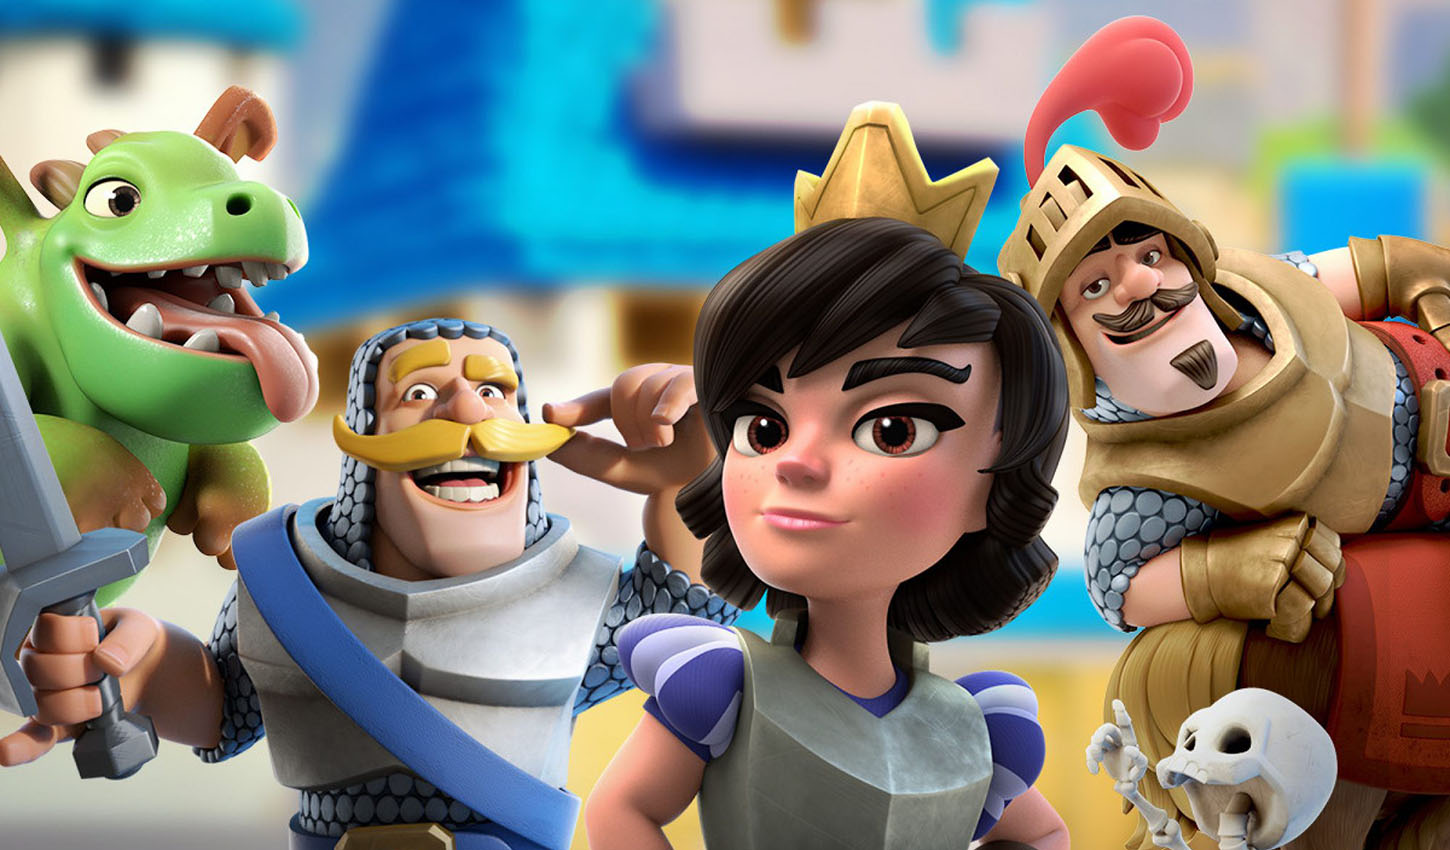 Clash Royale Daily Revenue Exceeded $1.5 Million in August